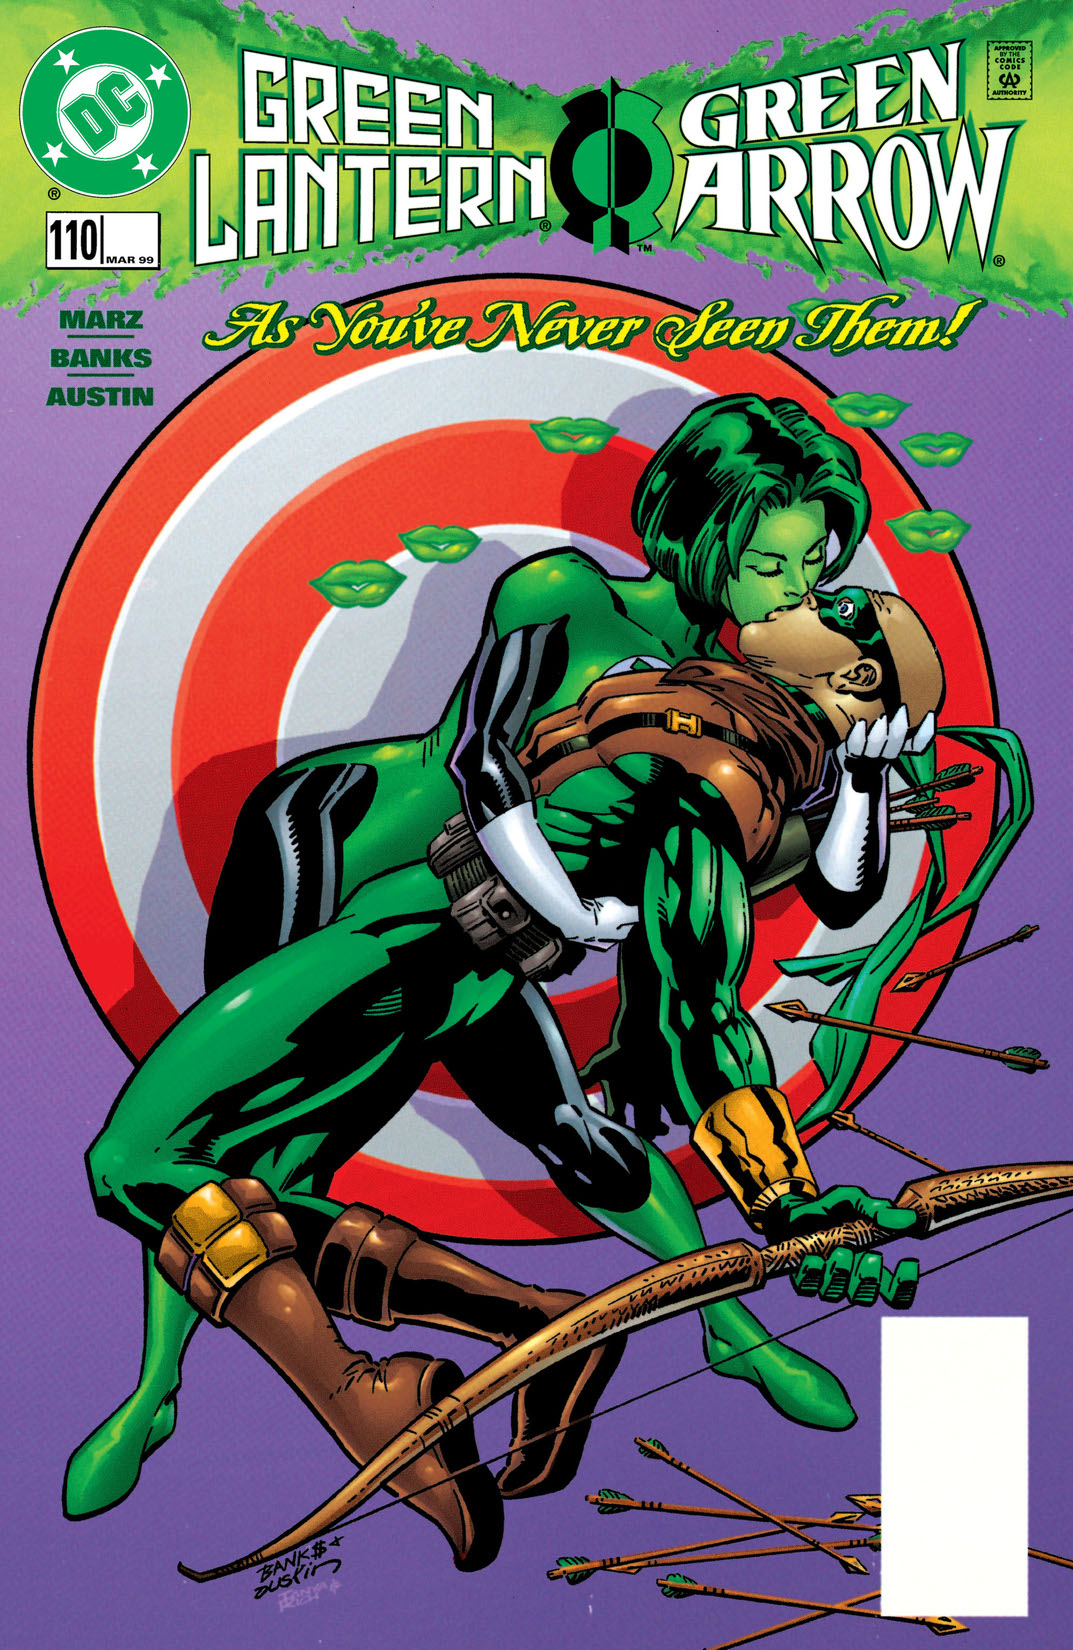 Green Lantern (1990-) #110 preview images